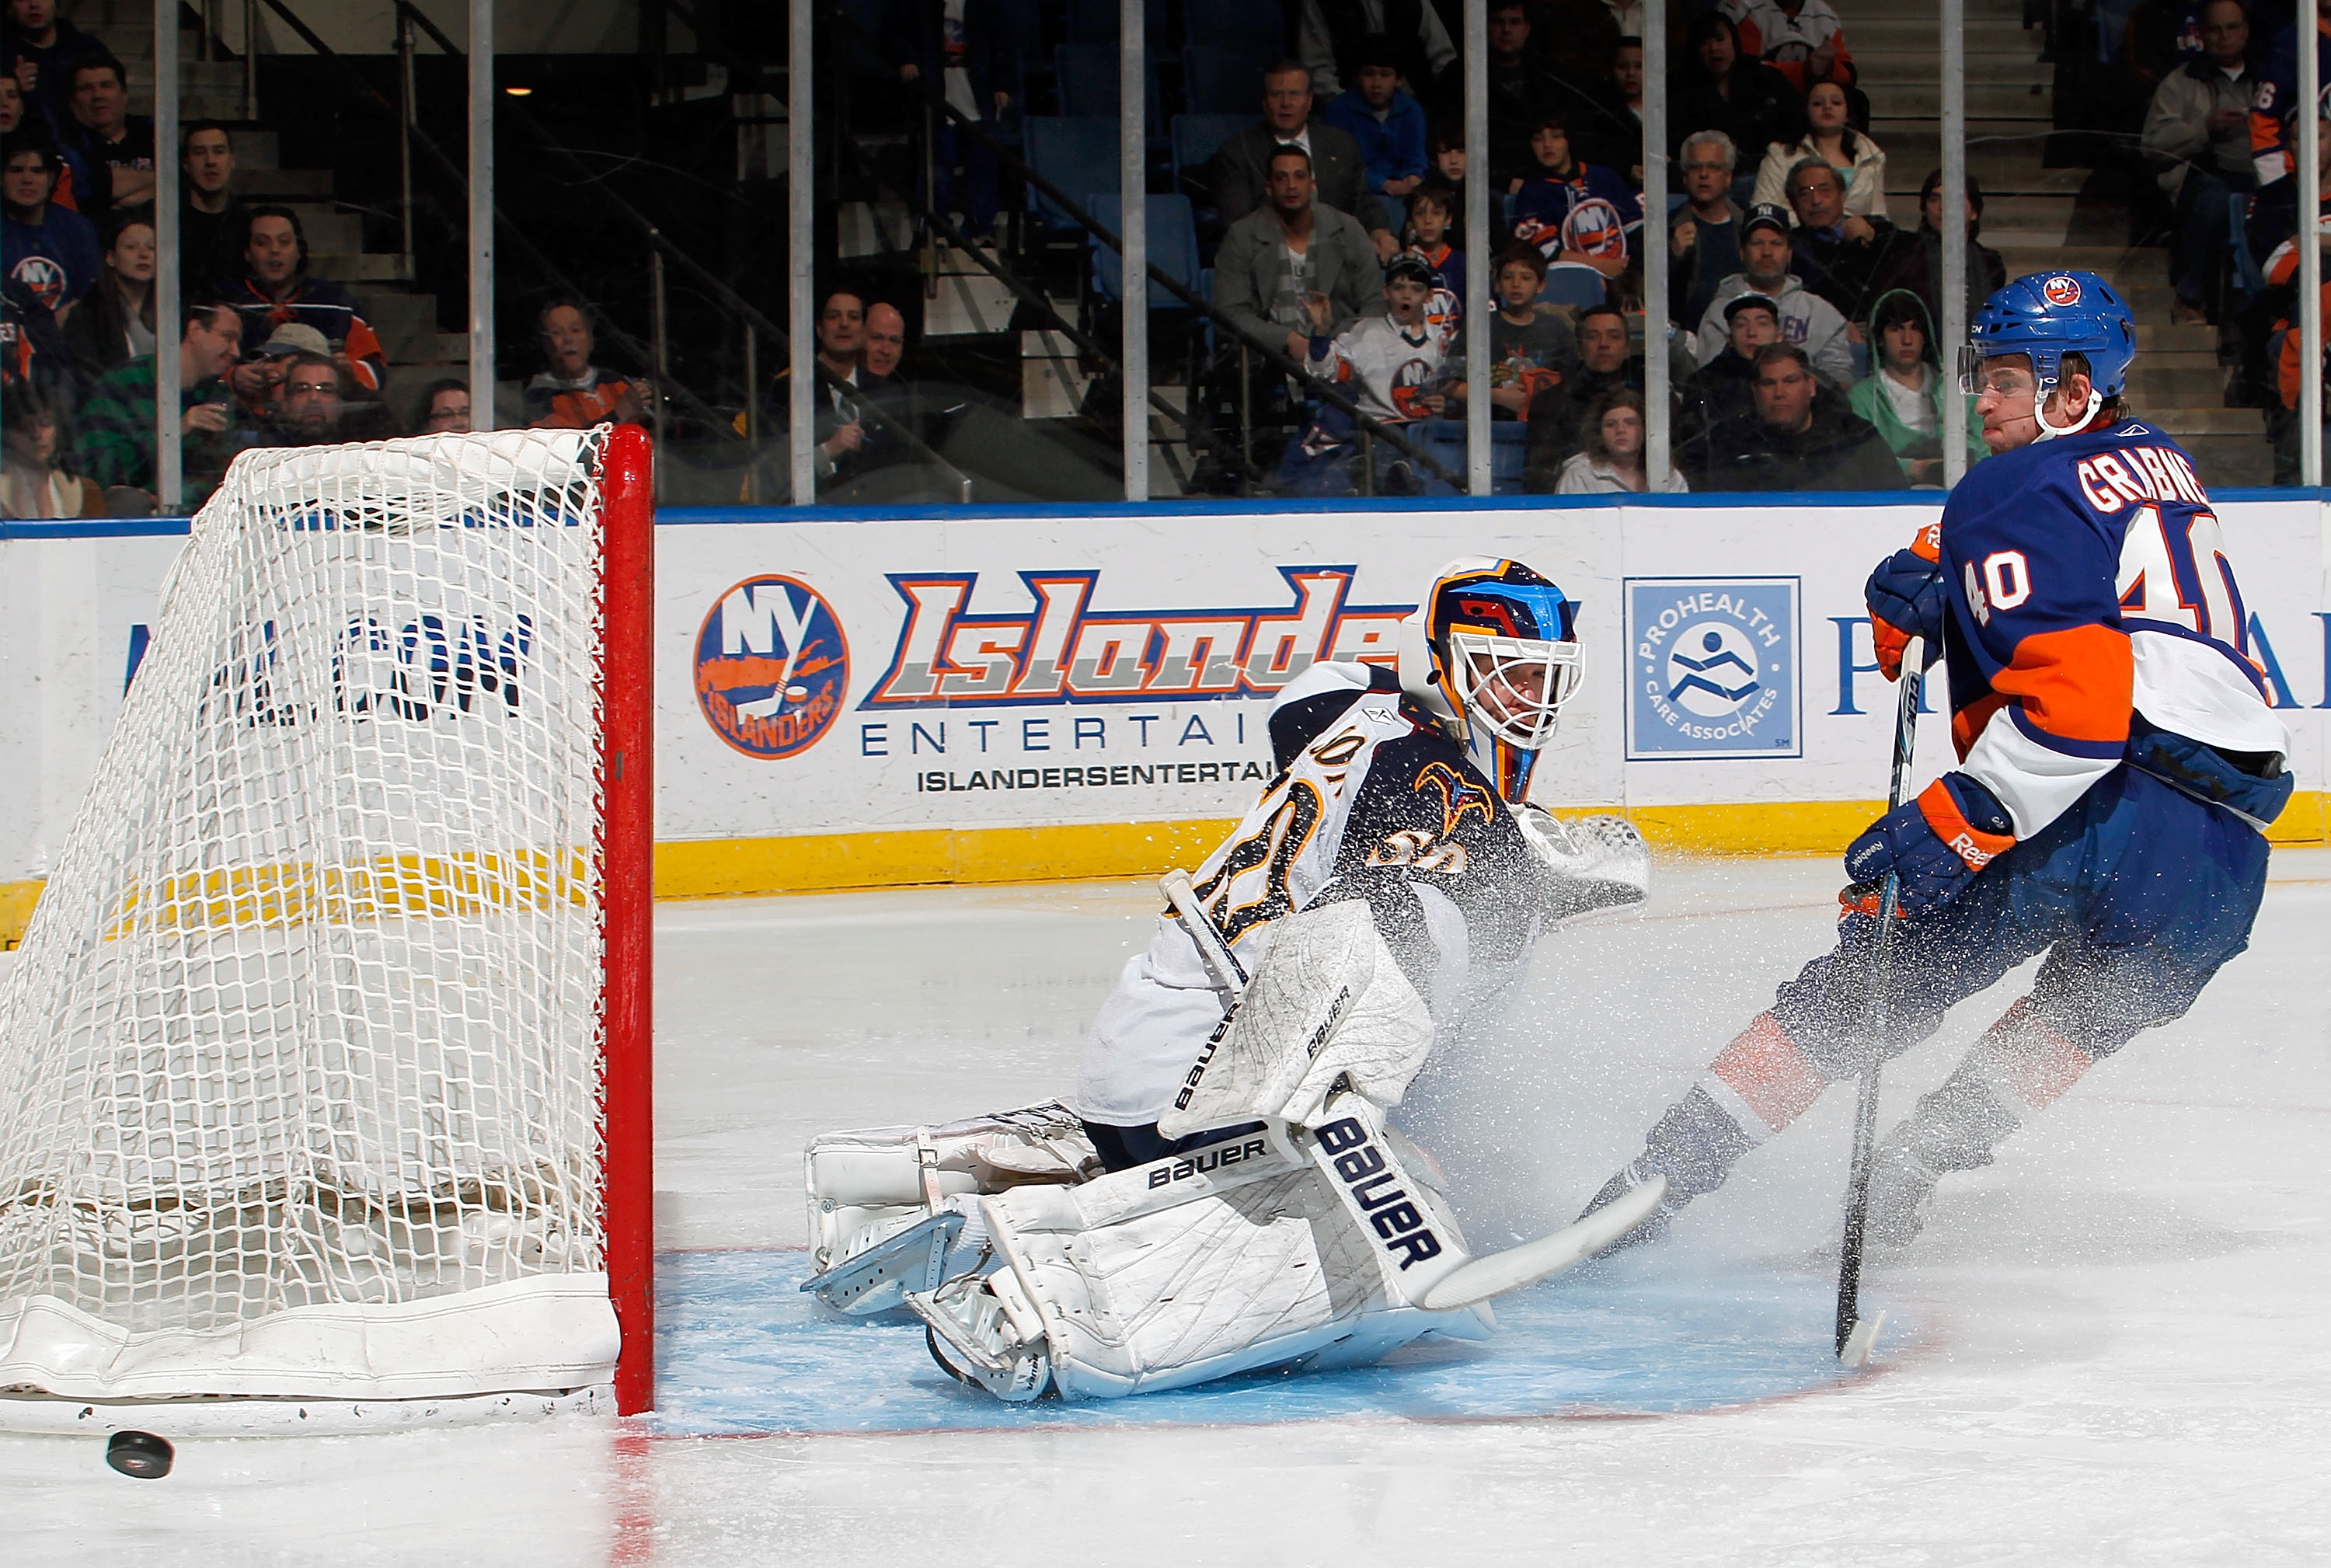 UNIONDALE, NY - MARCH 24:  Goalie Chris Mason #50 of the Atlanta Thrashers makes a save on this breakaway by Michael Grabner #40 of the New York Islanders during the second period of an NHL hockey game at the Nassau Coliseum on March 24, 2011 in Uniondale